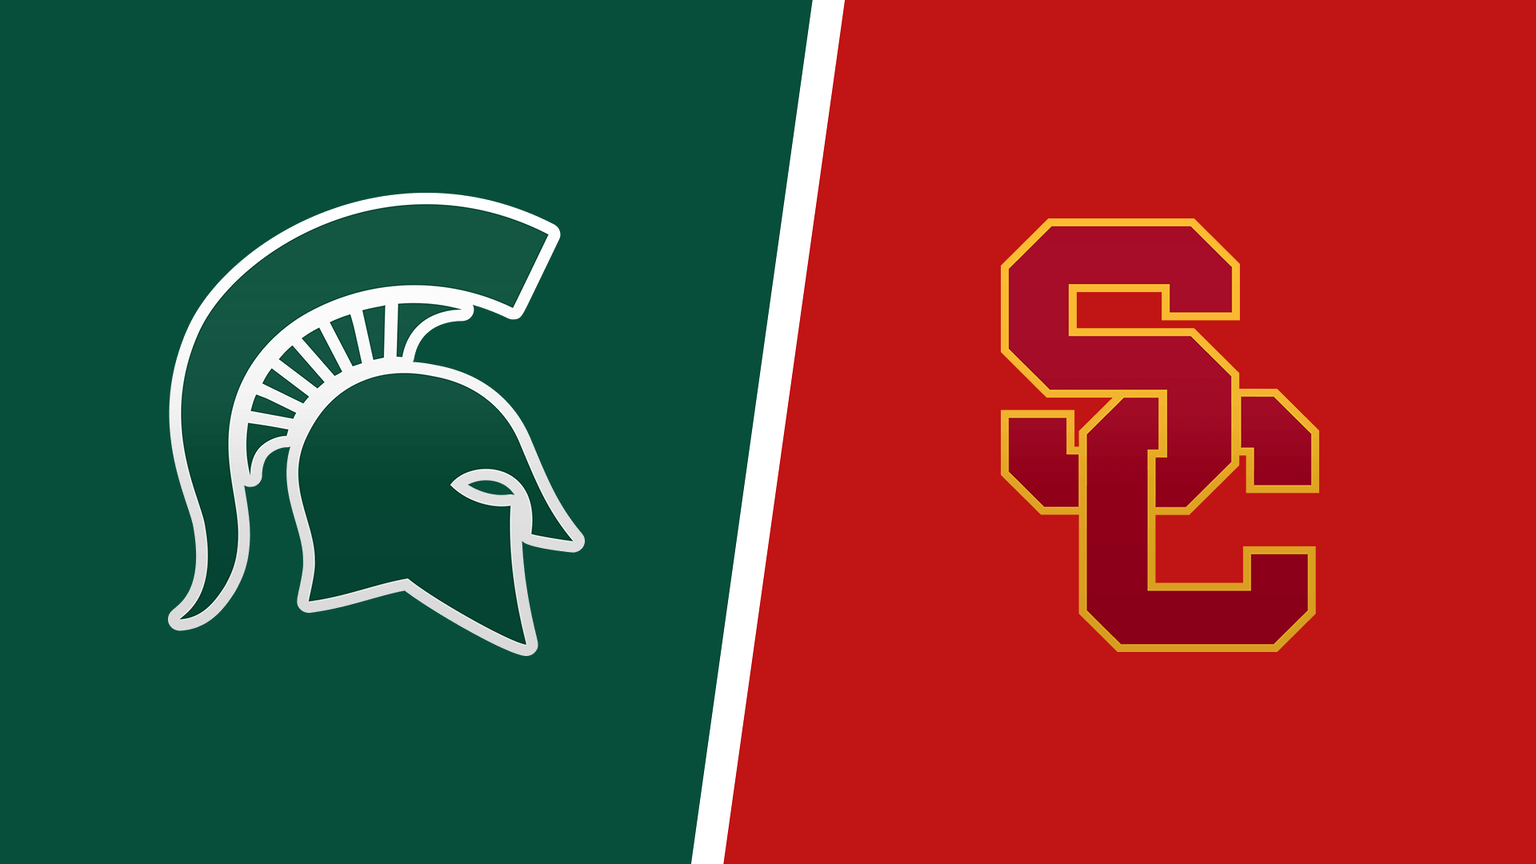 How to Watch USC vs. Michigan State Game Live Online on March 17, 2023